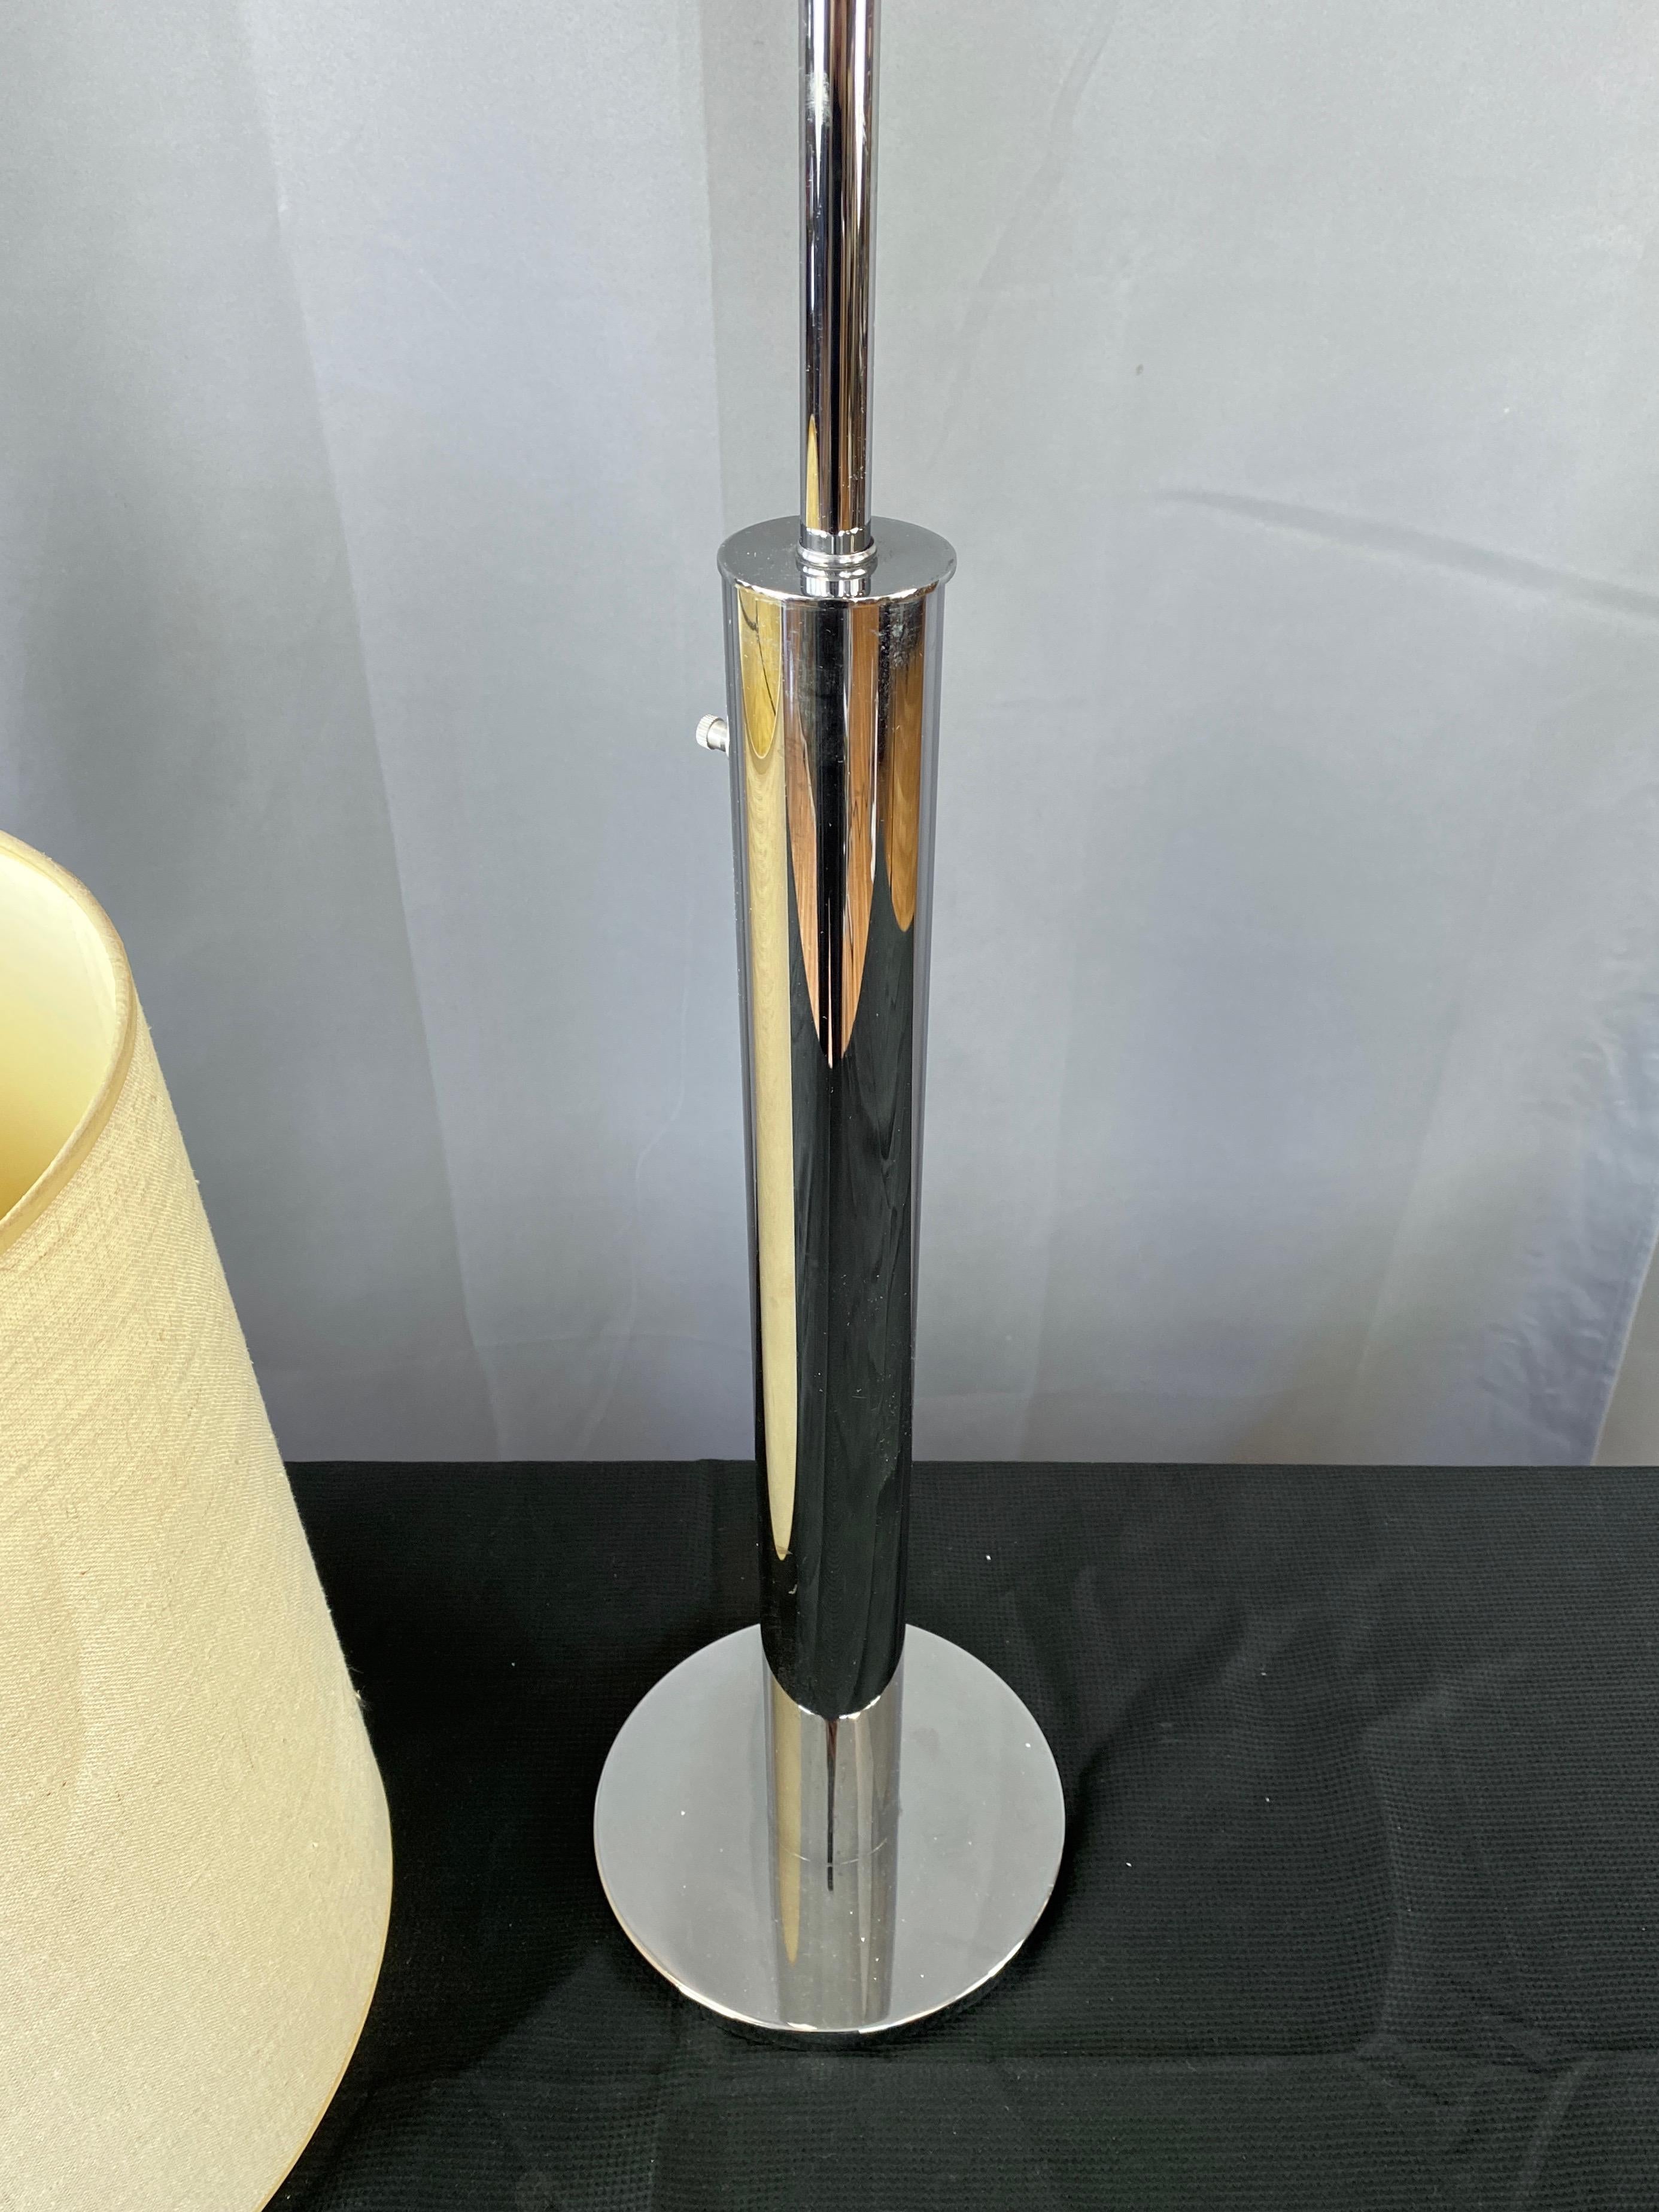 Cast Nessen Tall Minimalist Chrome Table Lamp with Original Shade, c. 1970 For Sale